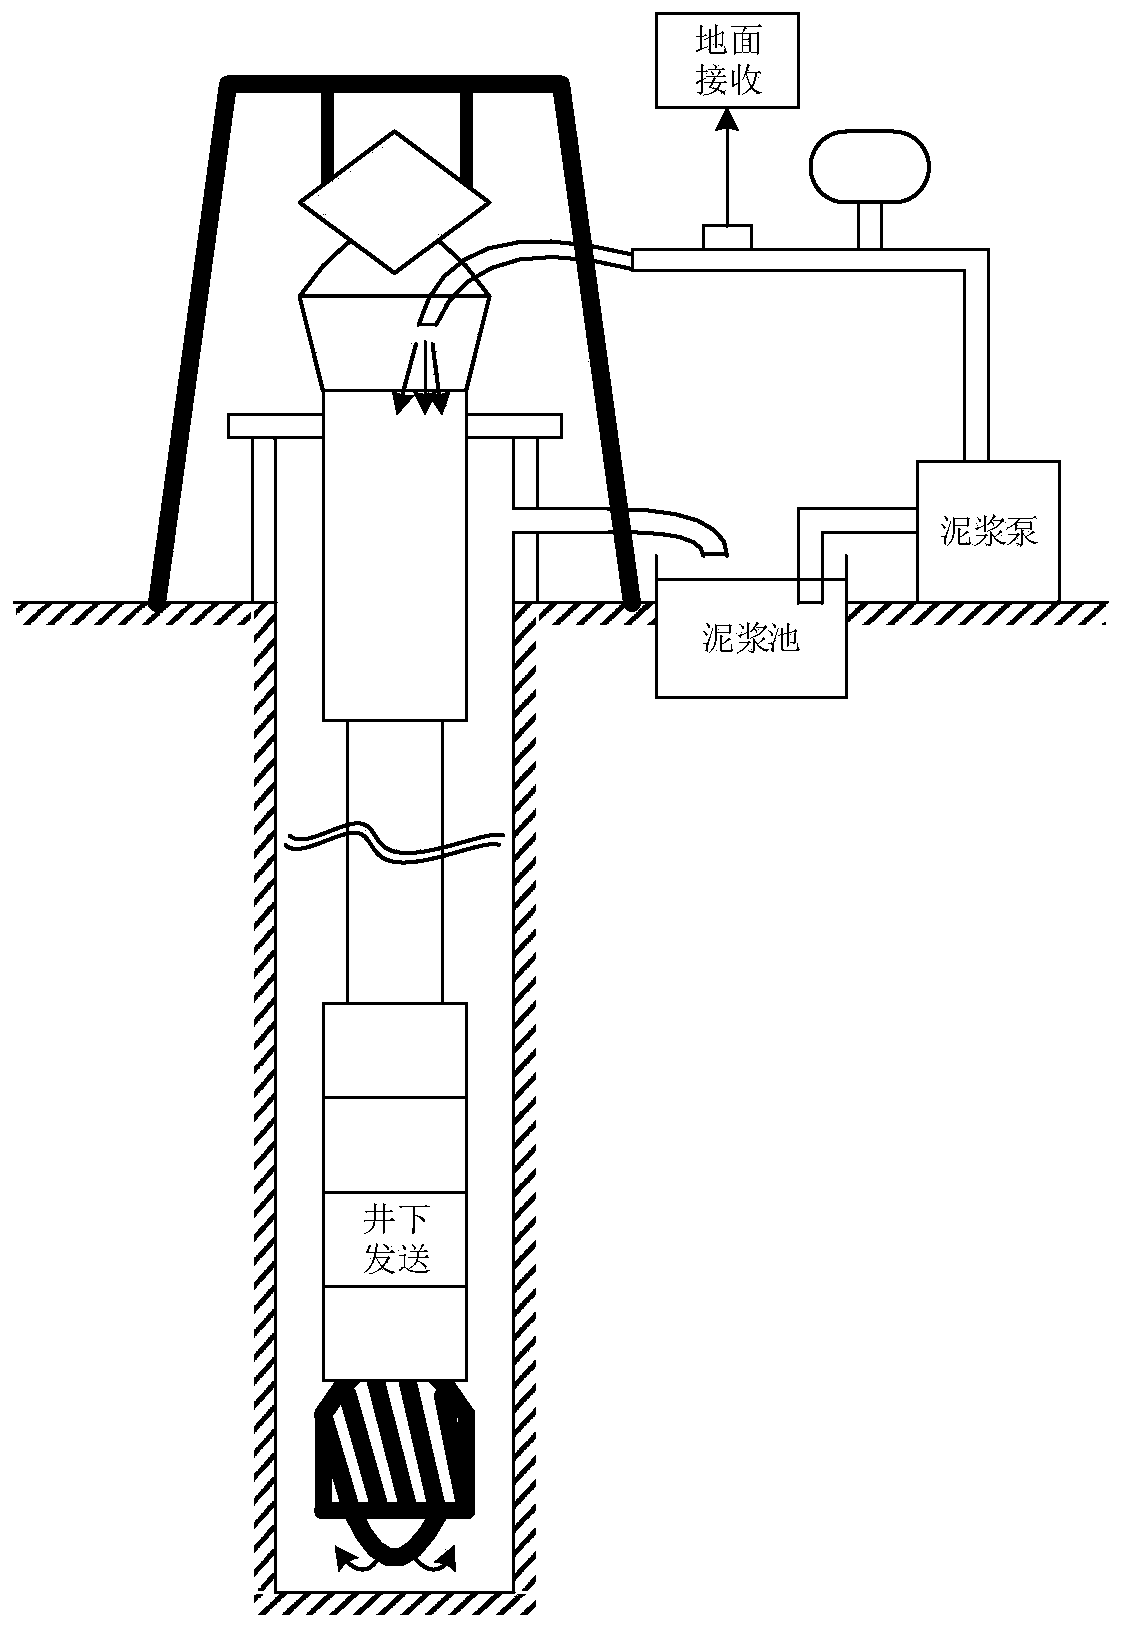 Noise elimination method and device for measurement while drilling (MWD) system